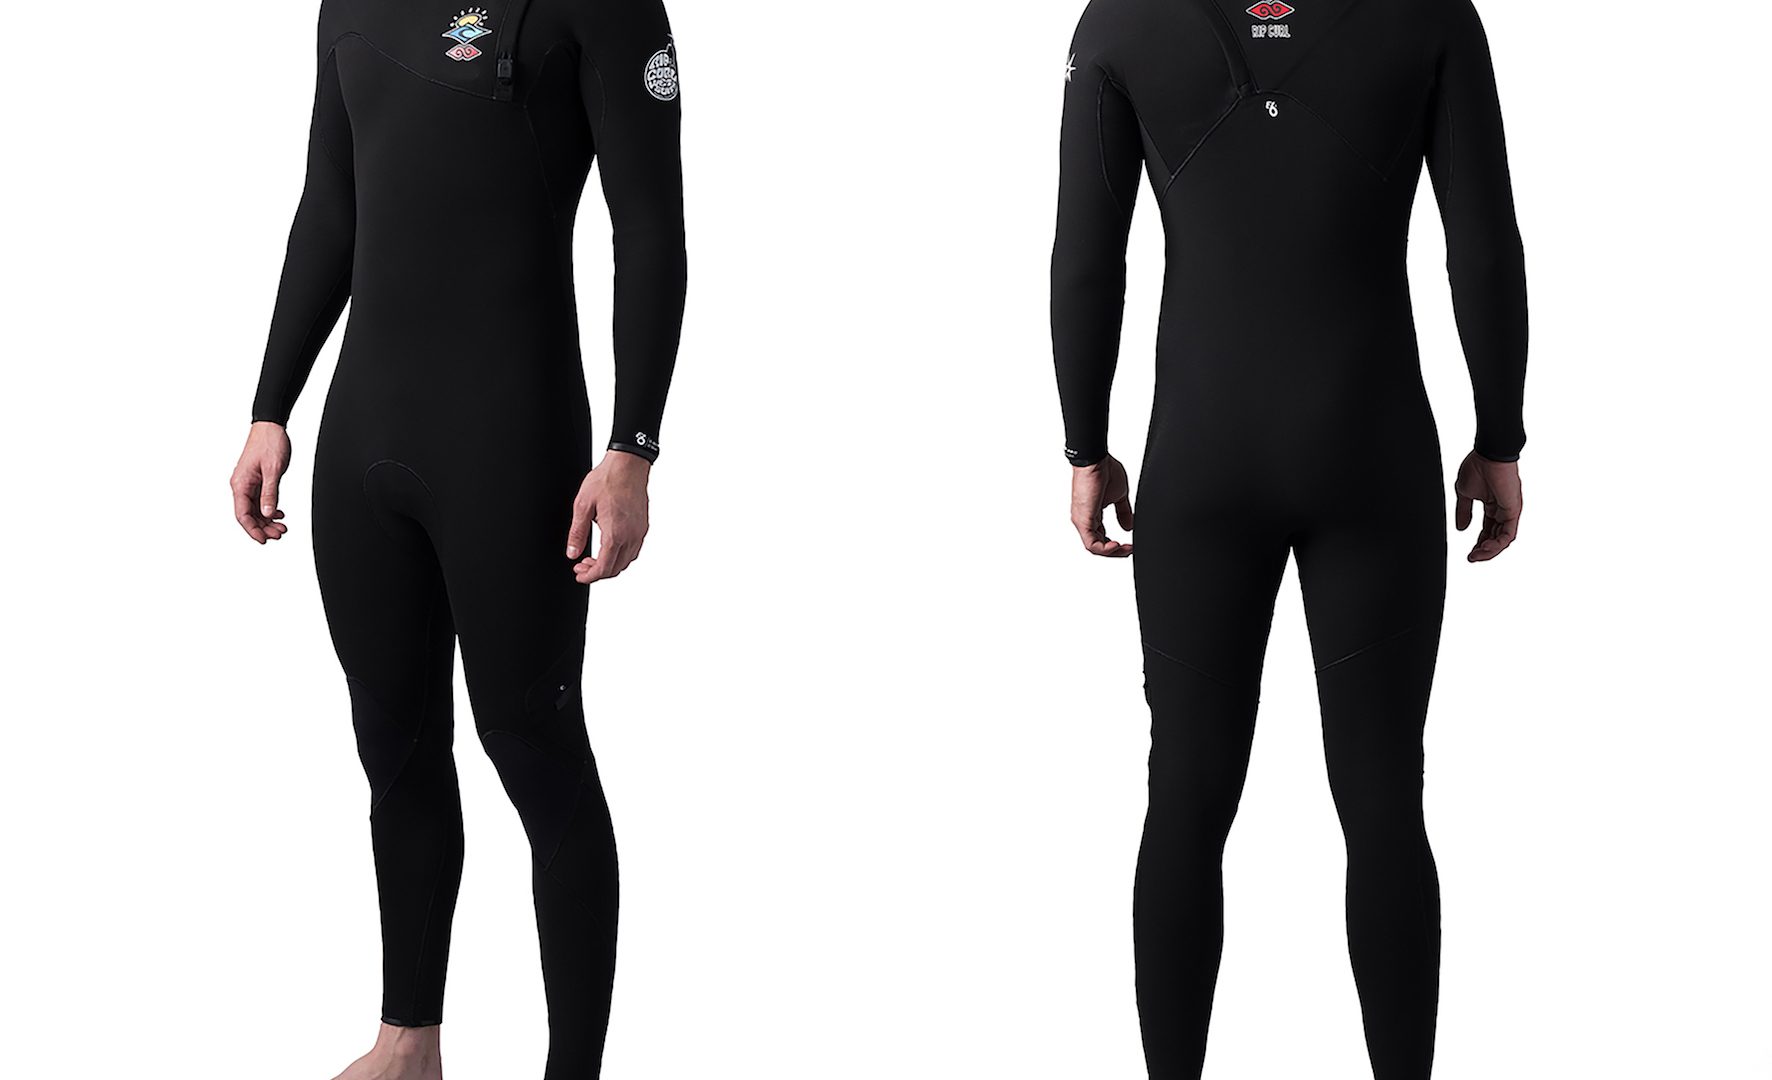 Ripcurl SS20 Wetsuits